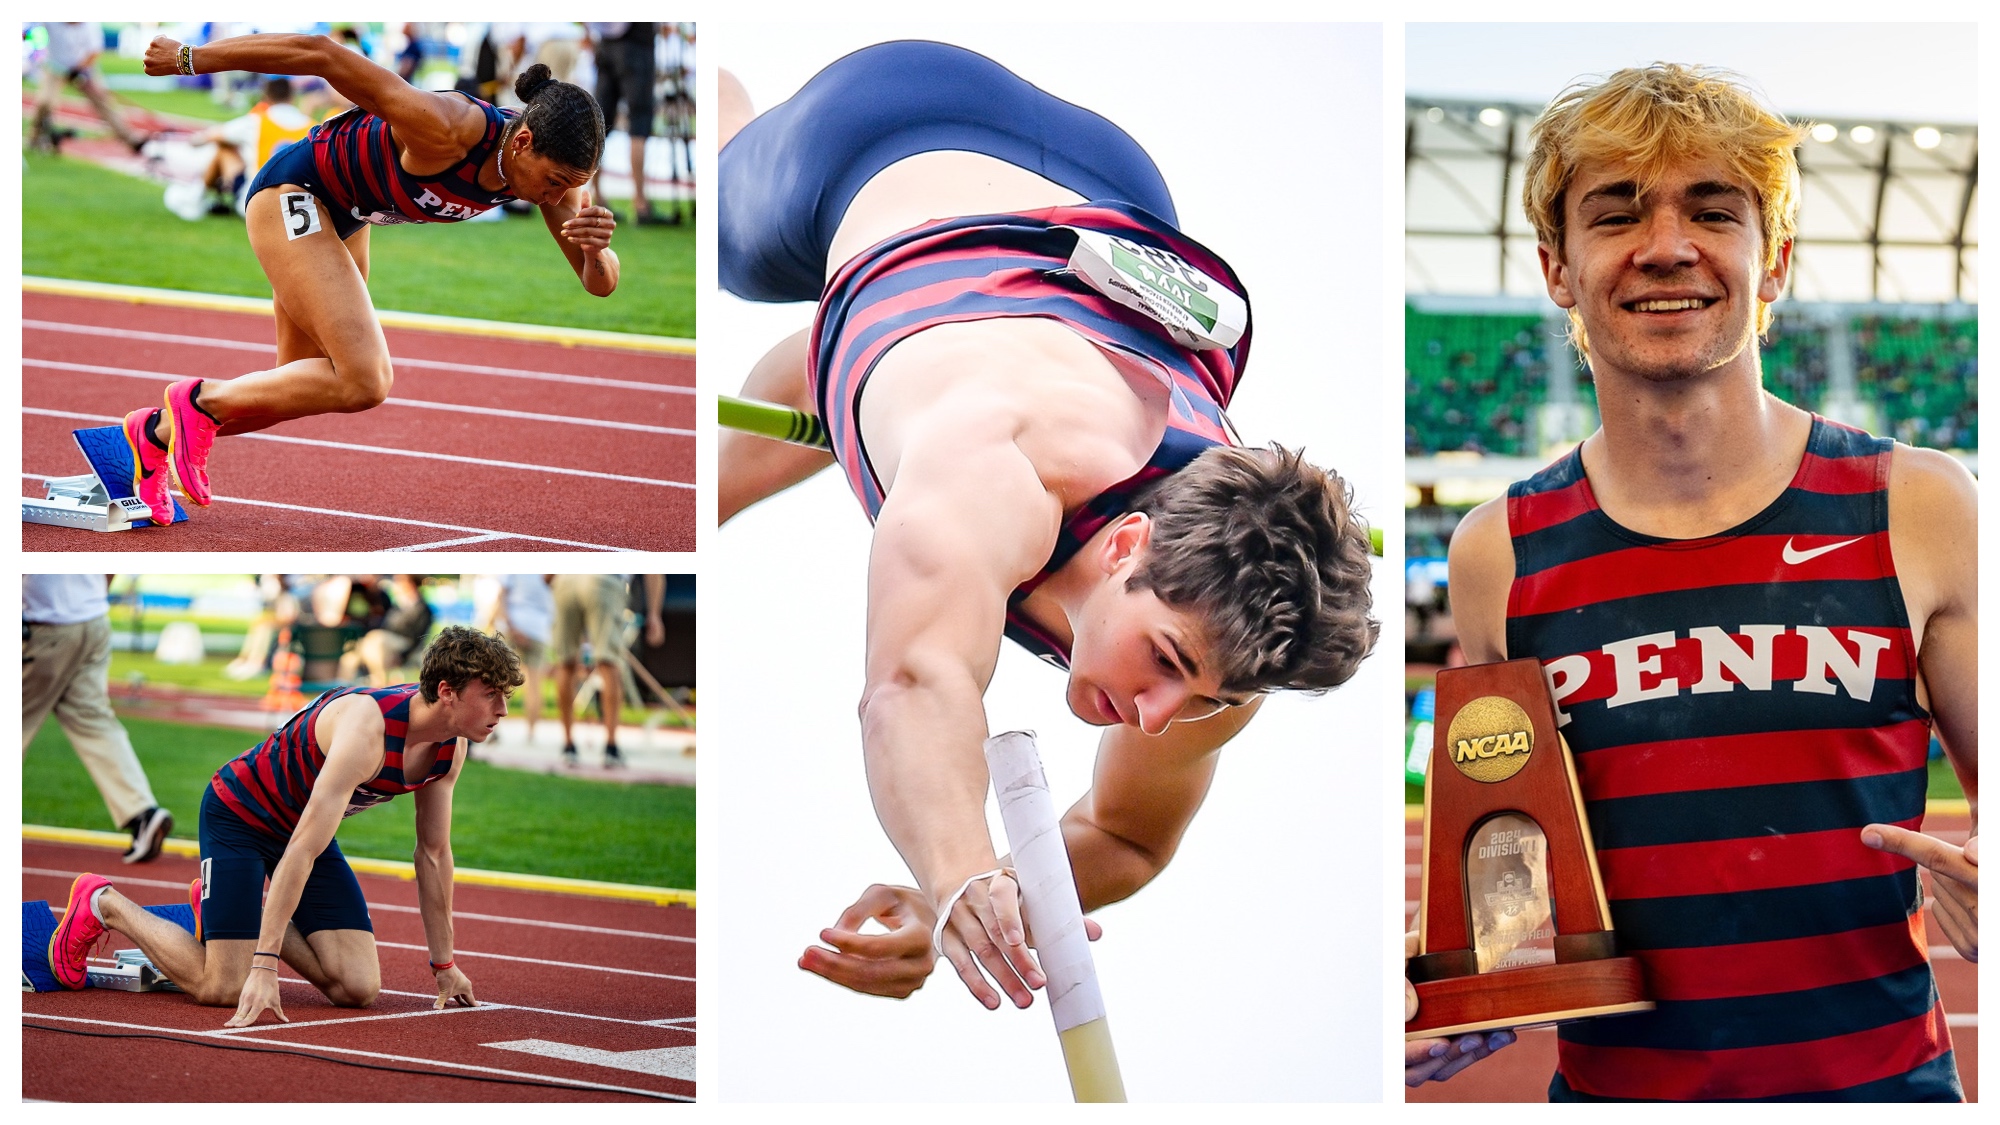 Four members of the track and field team compete at the NCAA Championships.